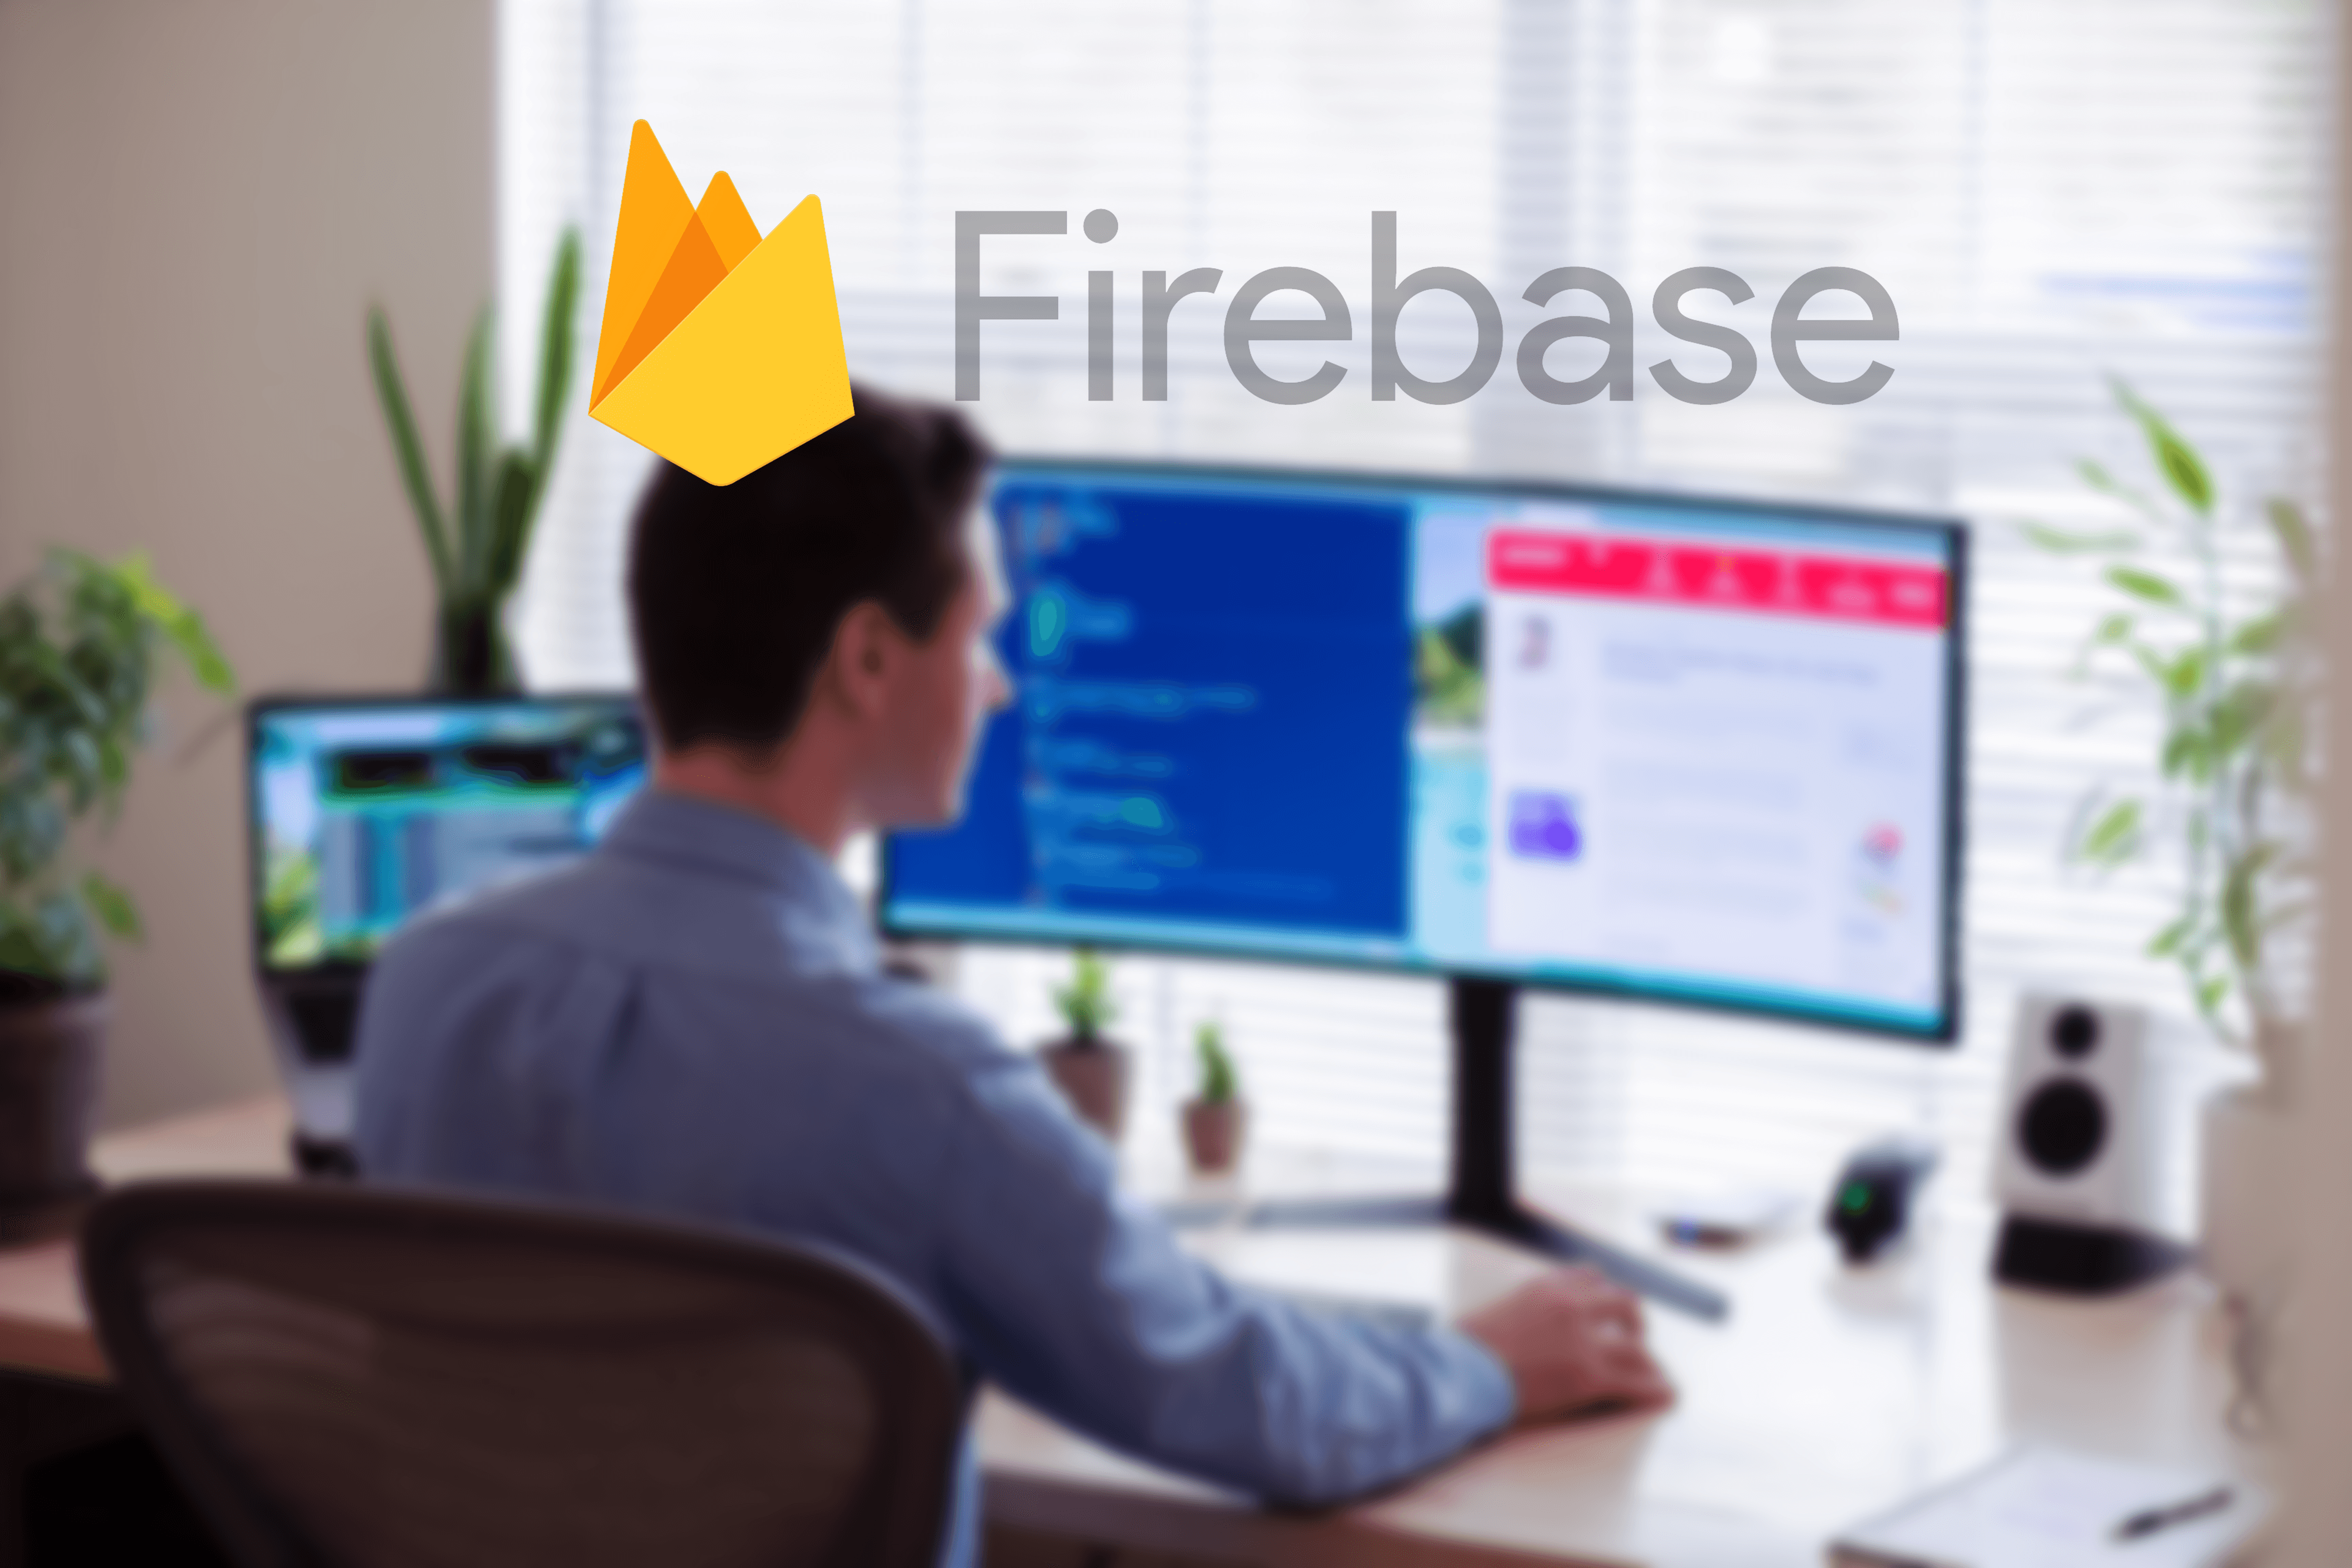 Man coding with Firebase logo in the foreground